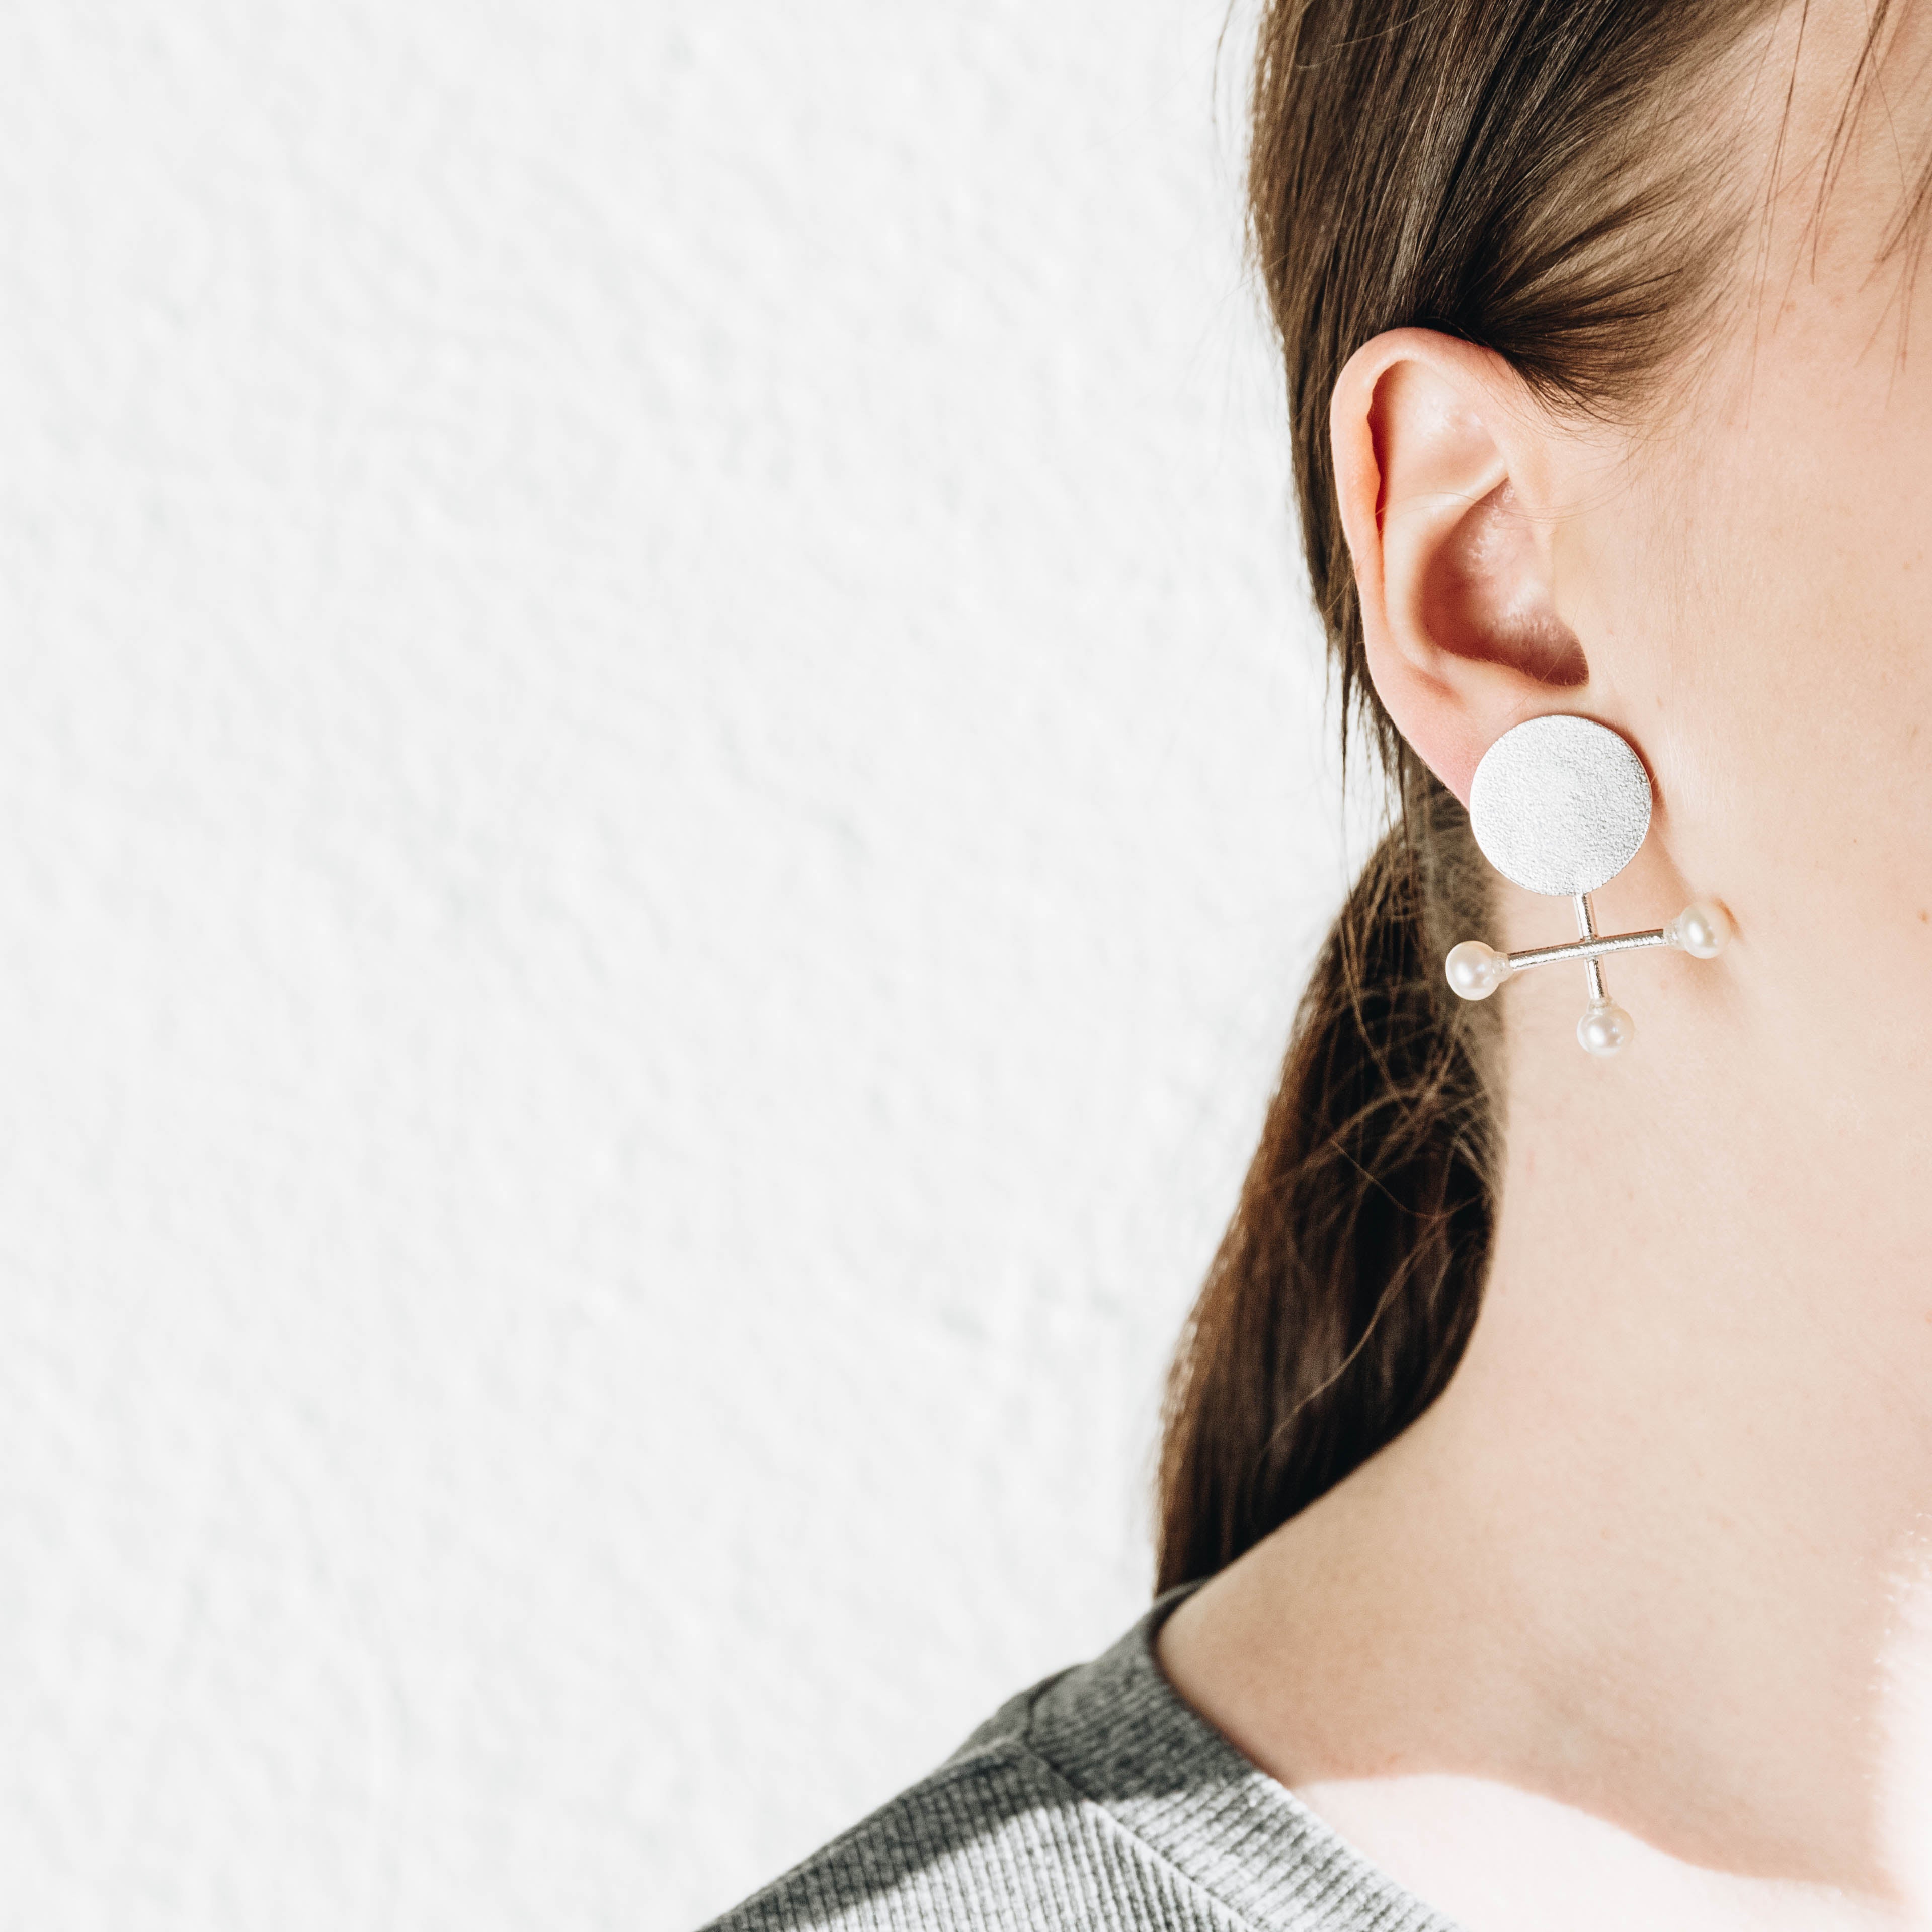 Composition, silver earrings